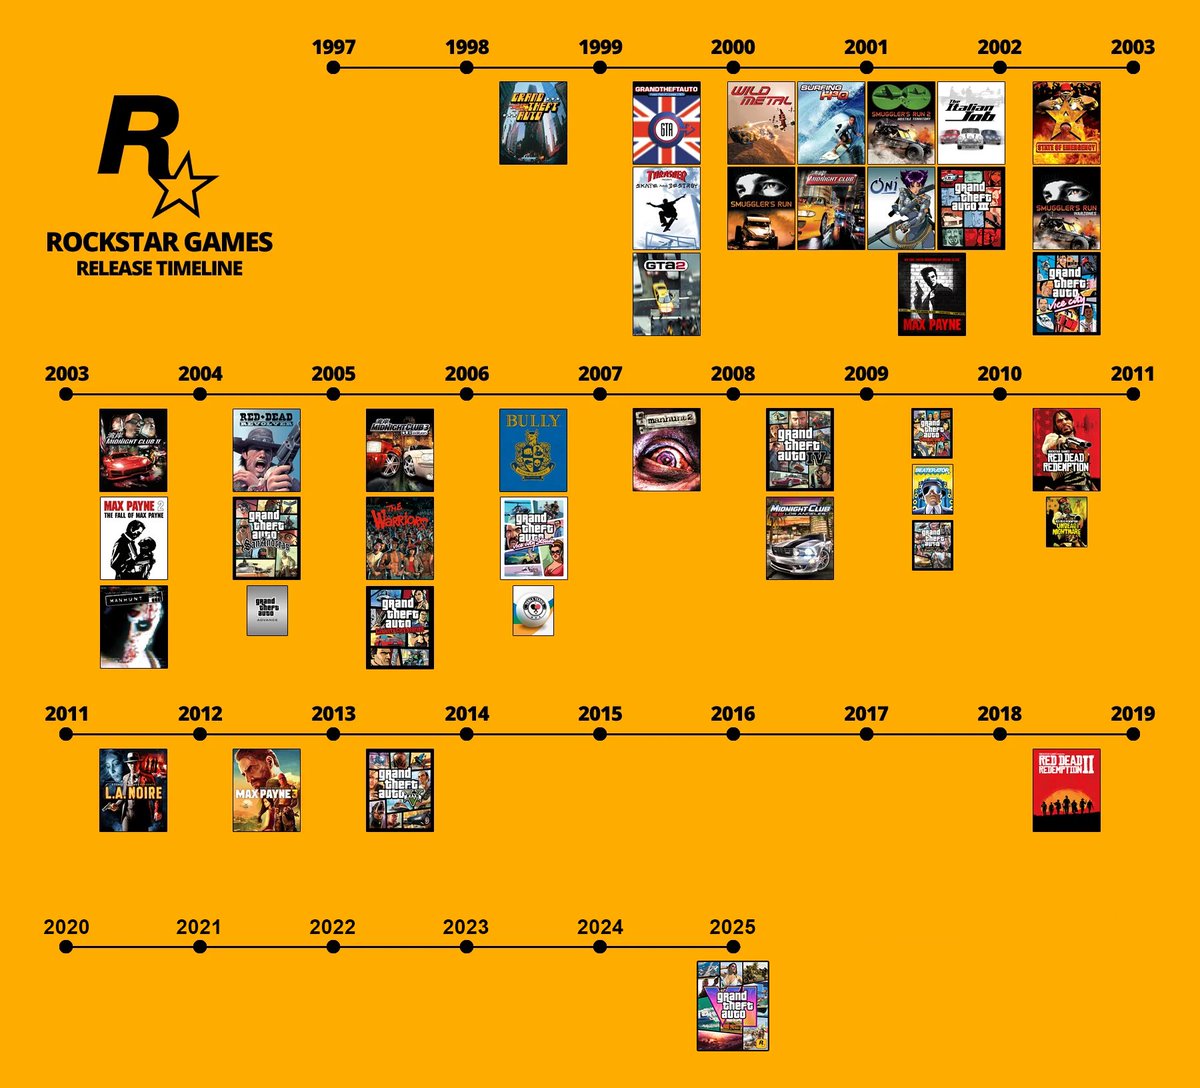 Rockstar Games Release Timeline Updated*

Red Dead Redemption 1 and GTA V were 3 years apart

Red Dead Redemption 2 and GTA VI are going to be 7 years apart